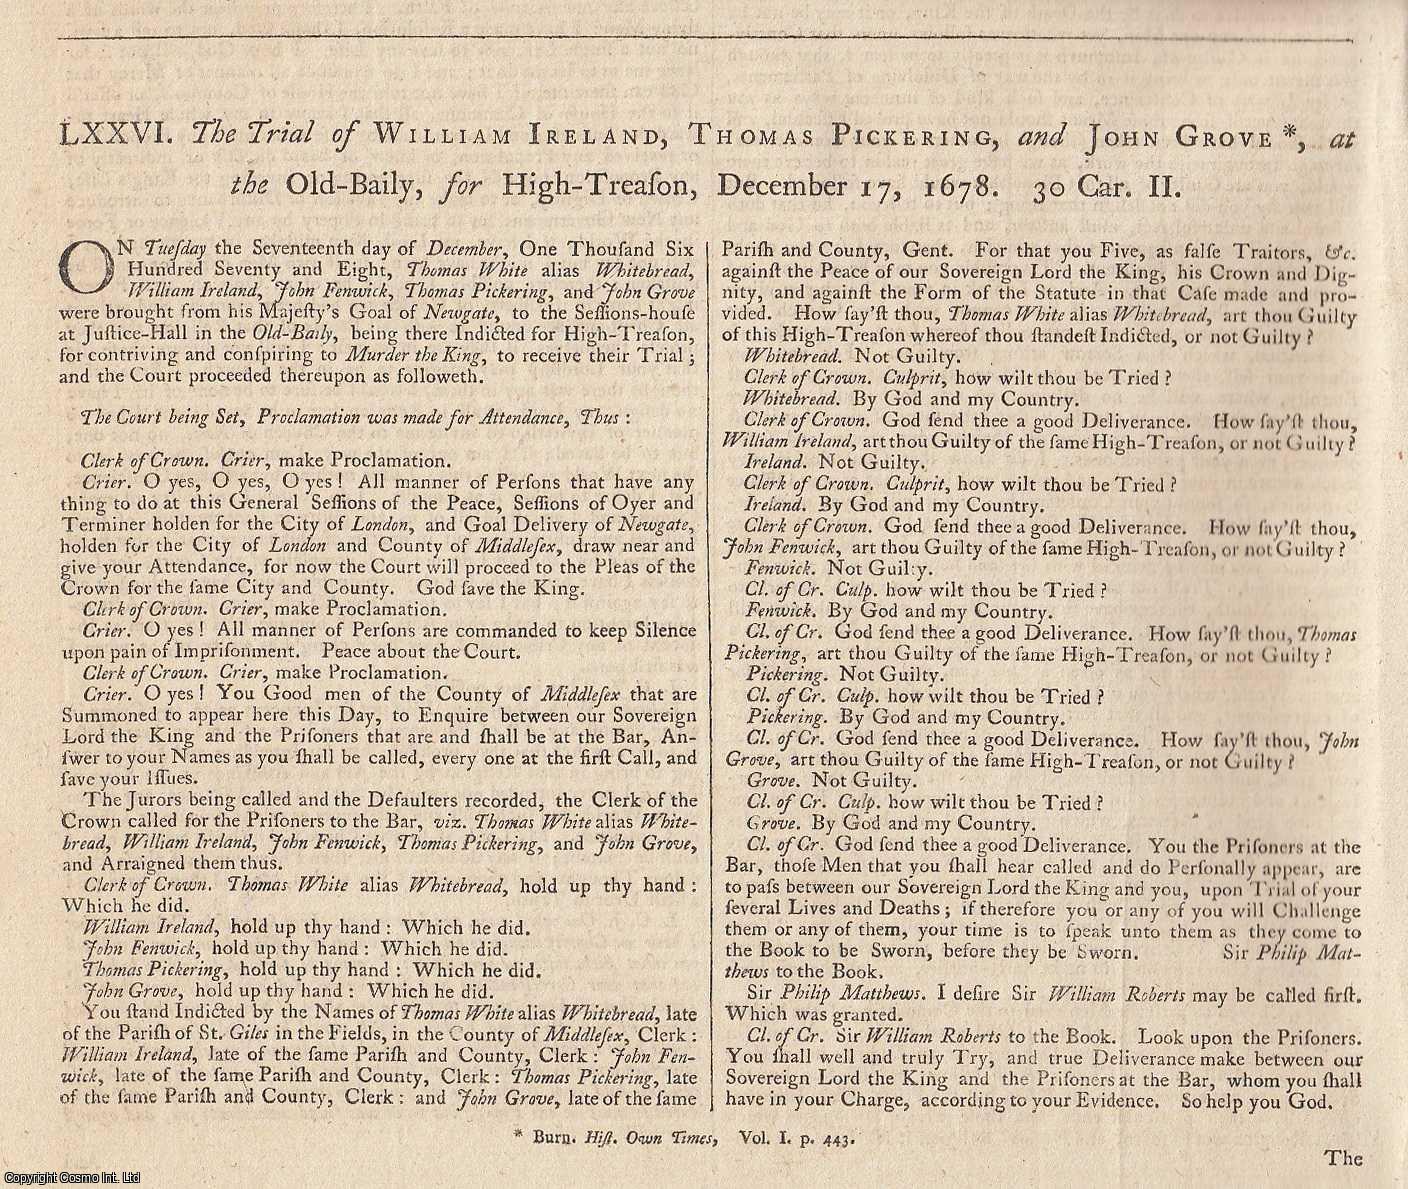 [Trial] - POPISH PLOT. The Trial of William Ireland, Thomas Pickering, and John Grove, at the Old-Bailey, for High Treason, December 17, 1678. An original article from the Collected State Trials.